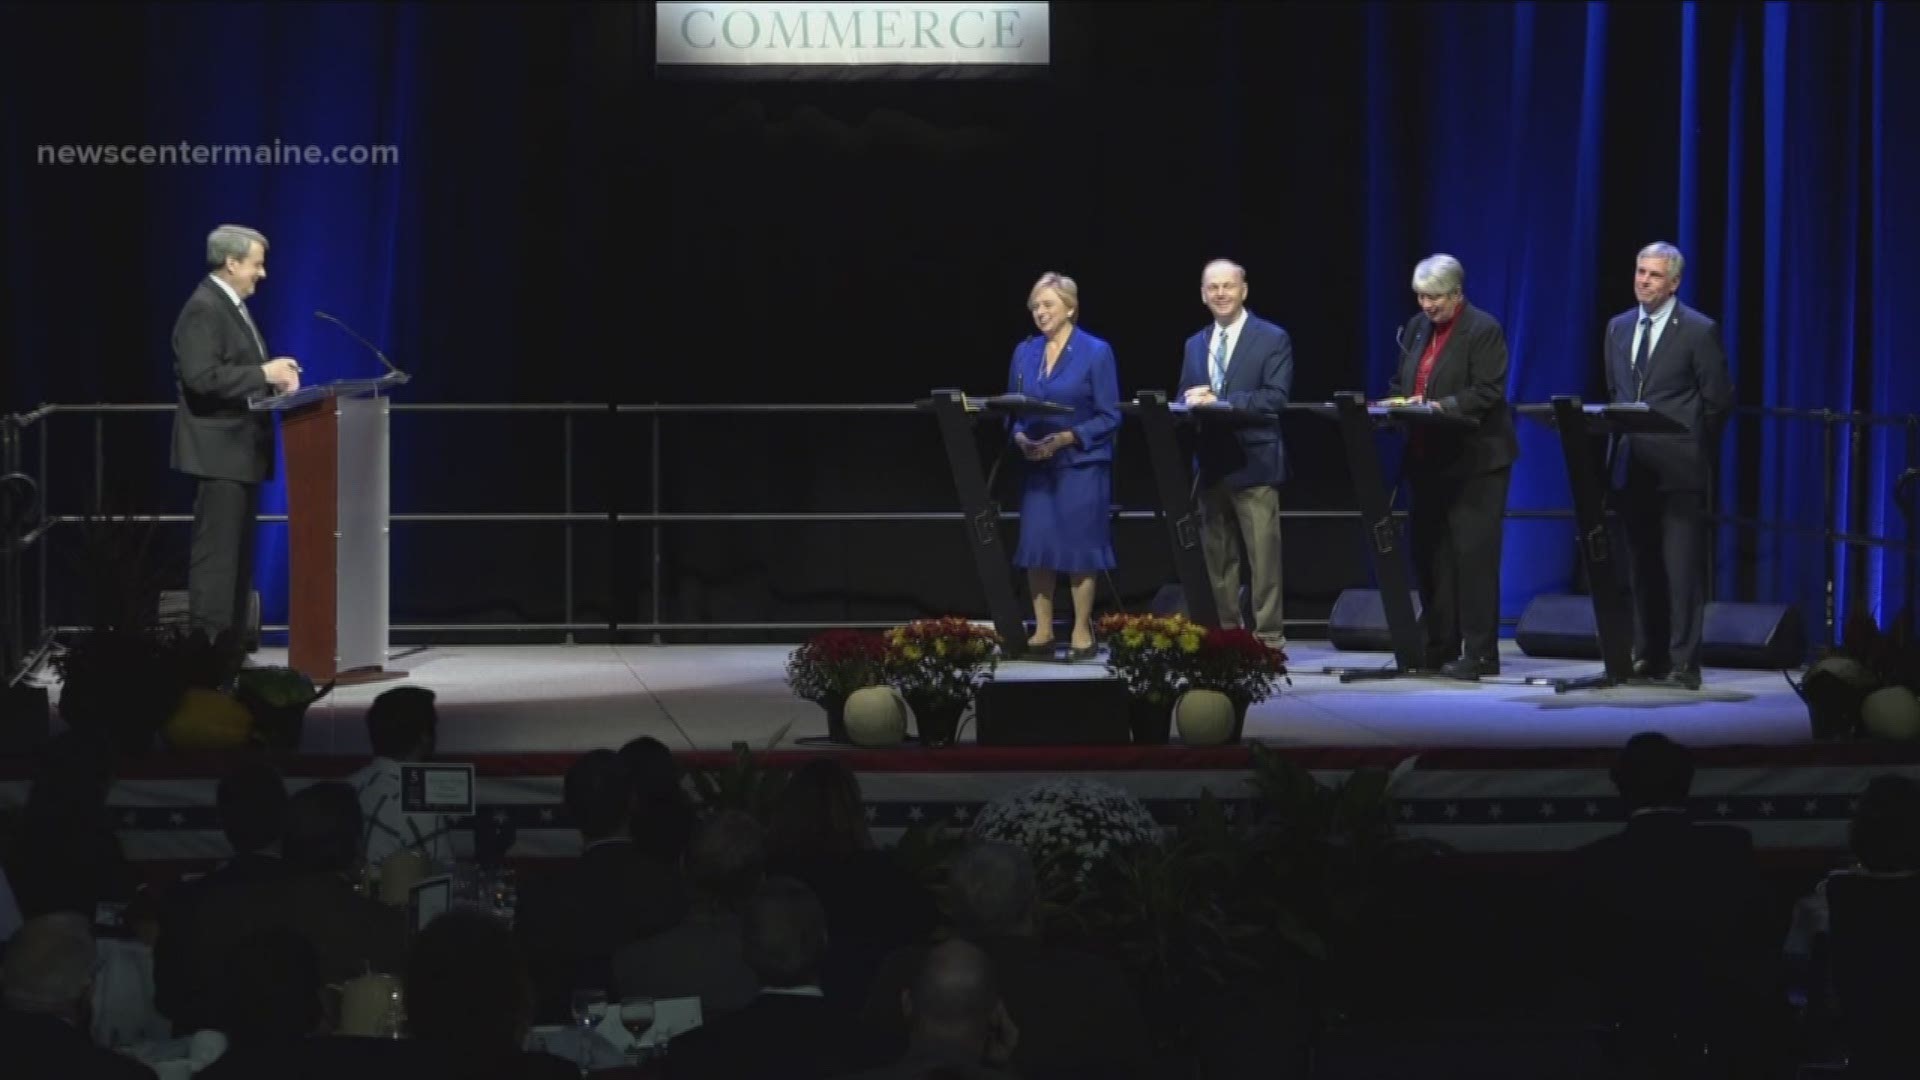 NEWS CENTER Maine's 2018 Gubernatorial Debate. Shawn Moody, Janet Mills, Alan Caron and Terry Hayes take questions from Pat Callaghan and our social media viewers about their run for the Blaine House.